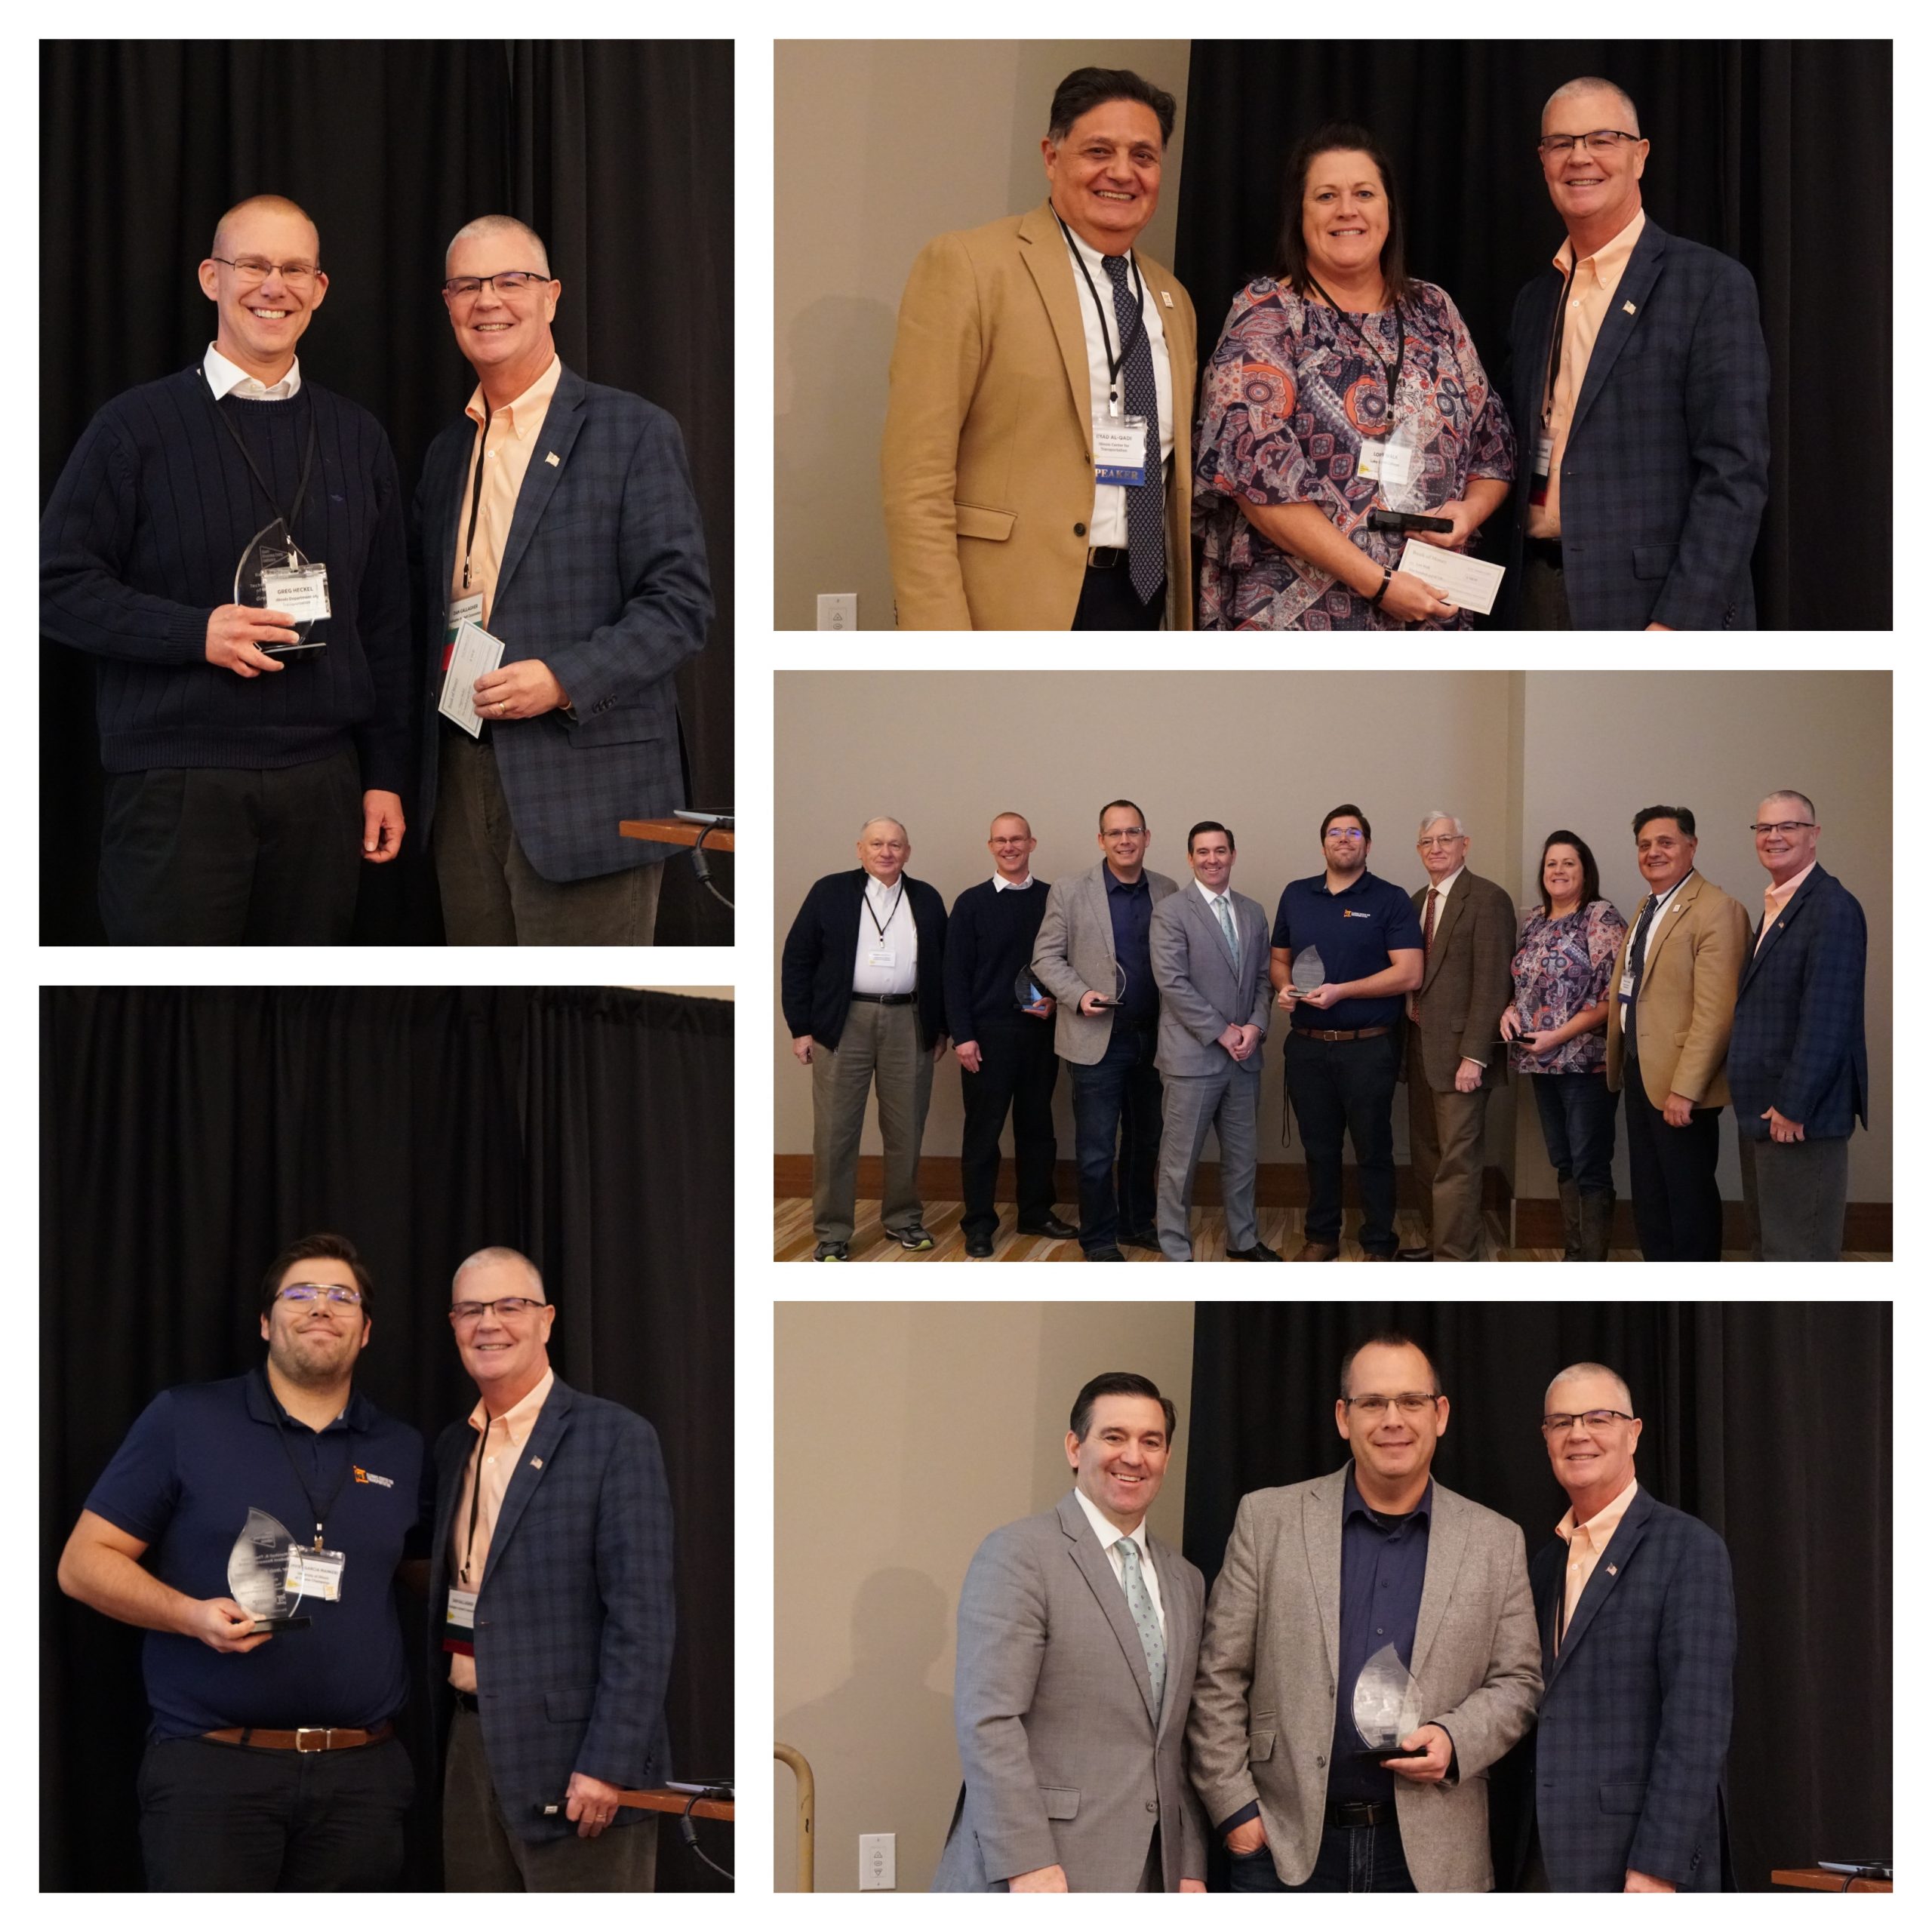 The 60th Illinois Bituminous Paving Conference award winners were all smiles while receiving their awards on Dec. 12, 2019. Award recipients included Greg Heckel (left, top left photo), Lori Walk (middle, top right photo), Javier Jes&uacute;s Garc&iacute;a Mainieri (left, bottom left photo) and Jeffrey Kern (middle, bottom right photo).